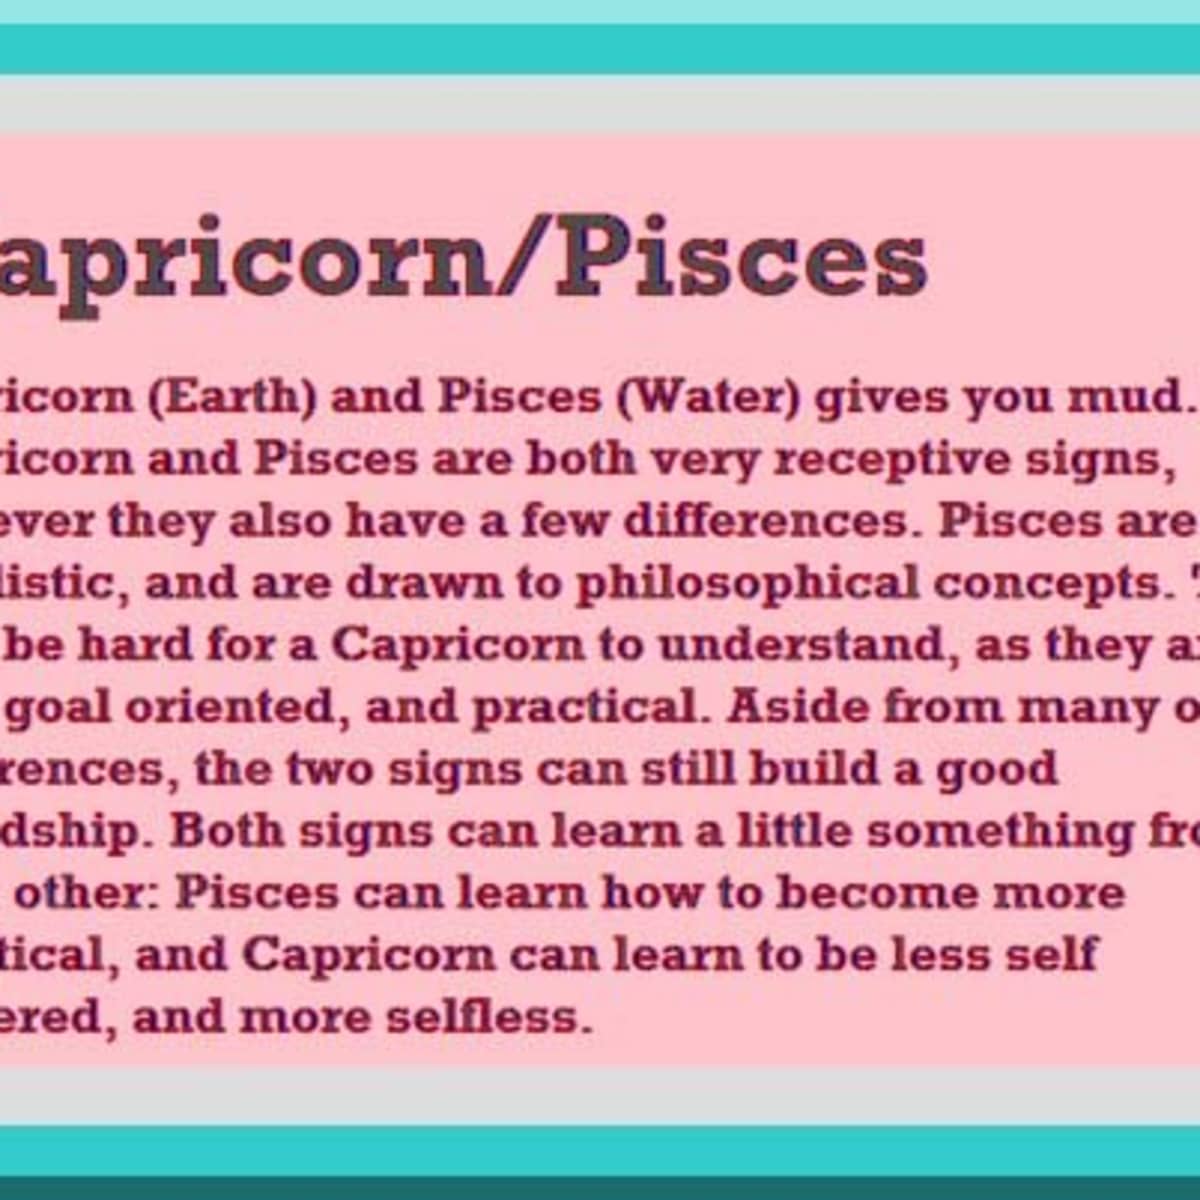 Marry to you to a wants if man capricorn know What He's